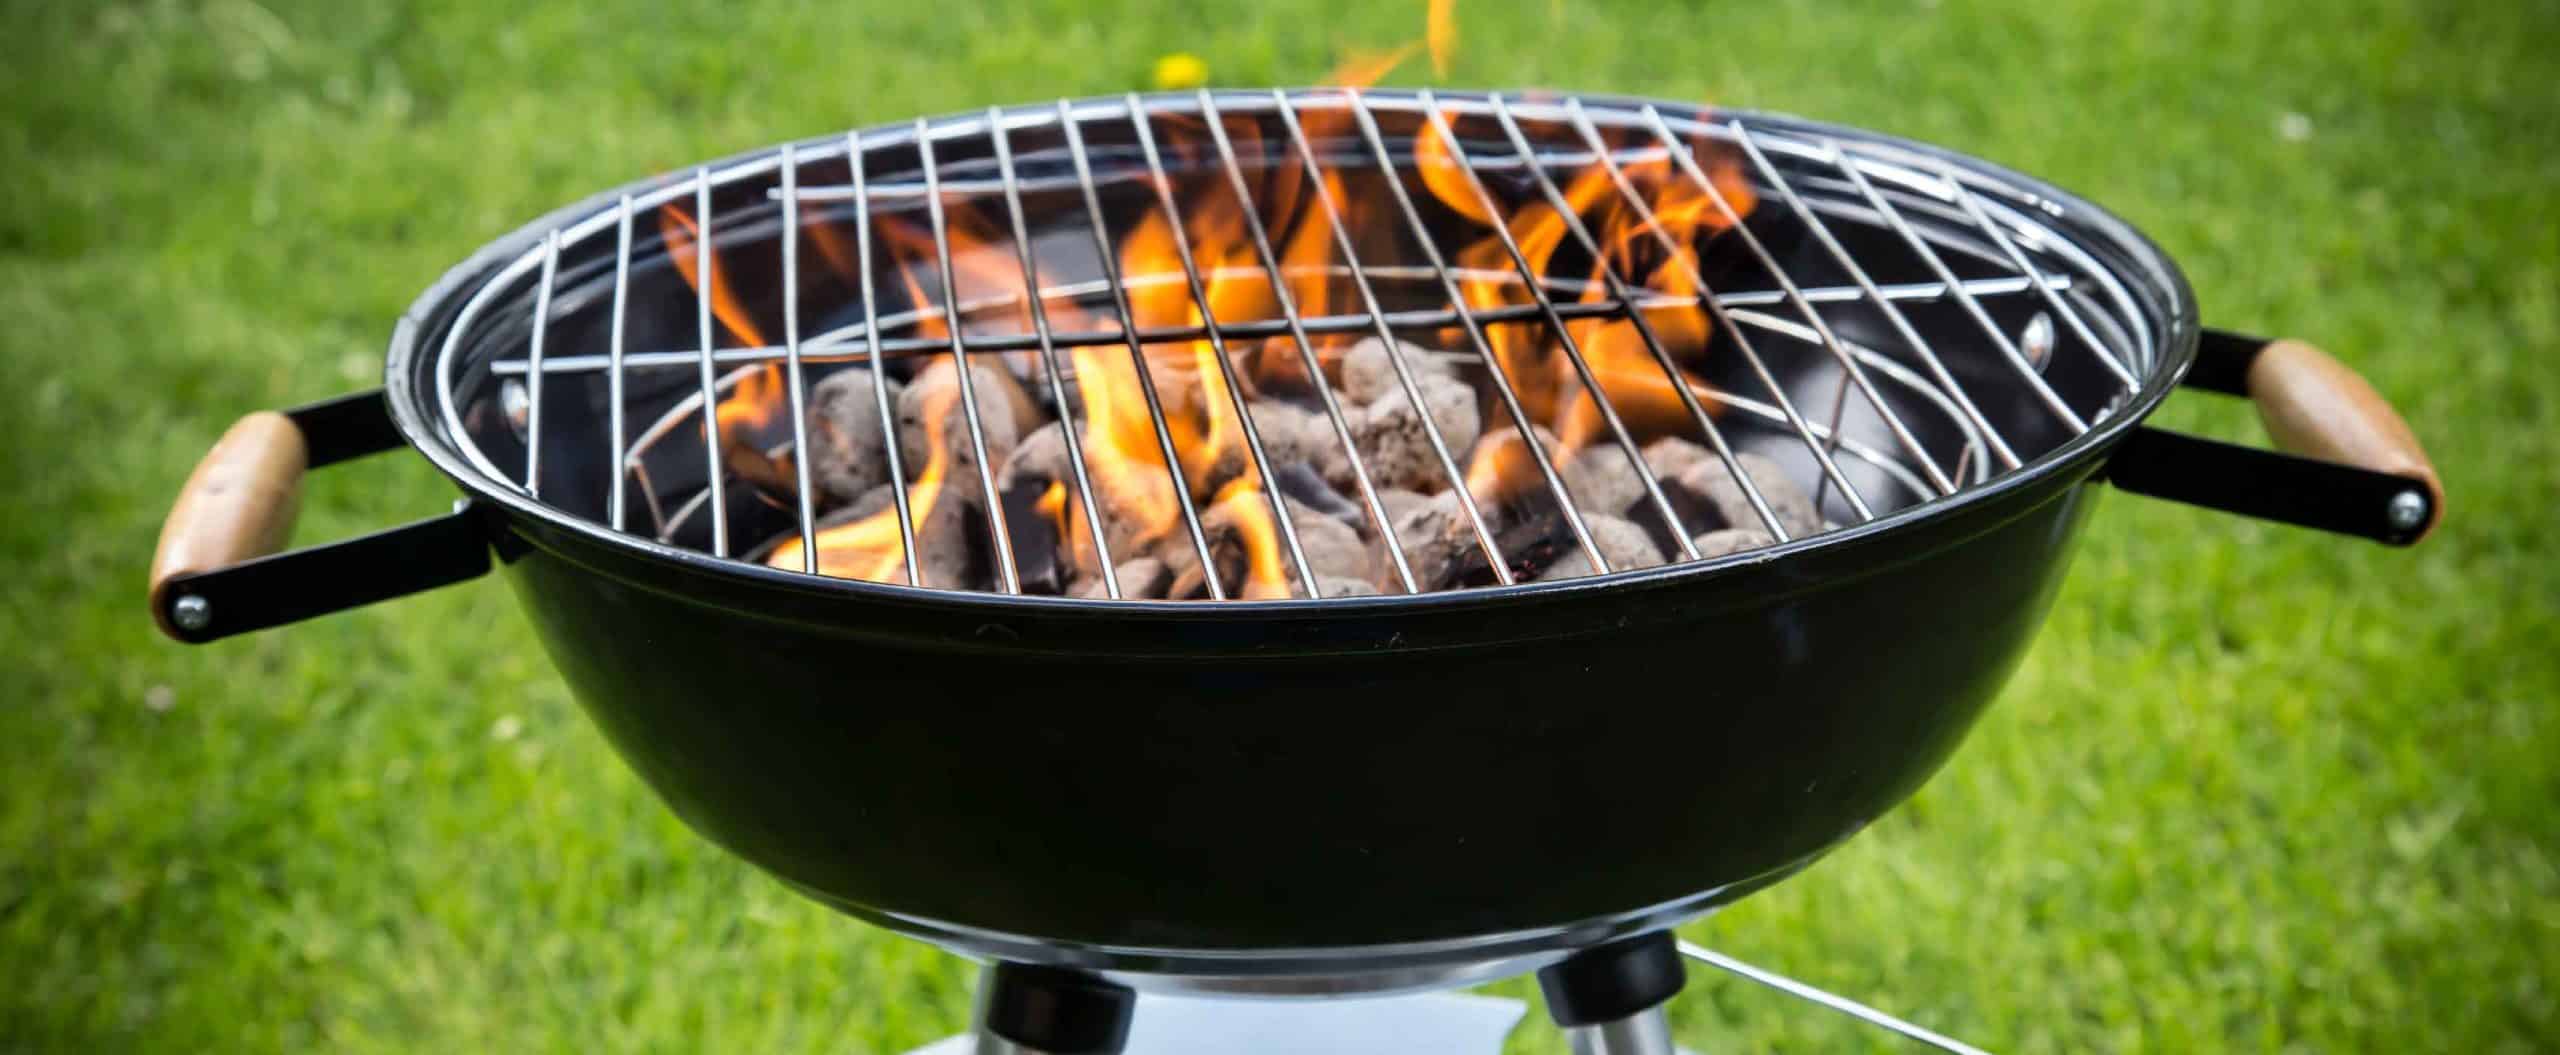 how to light charcoal grill